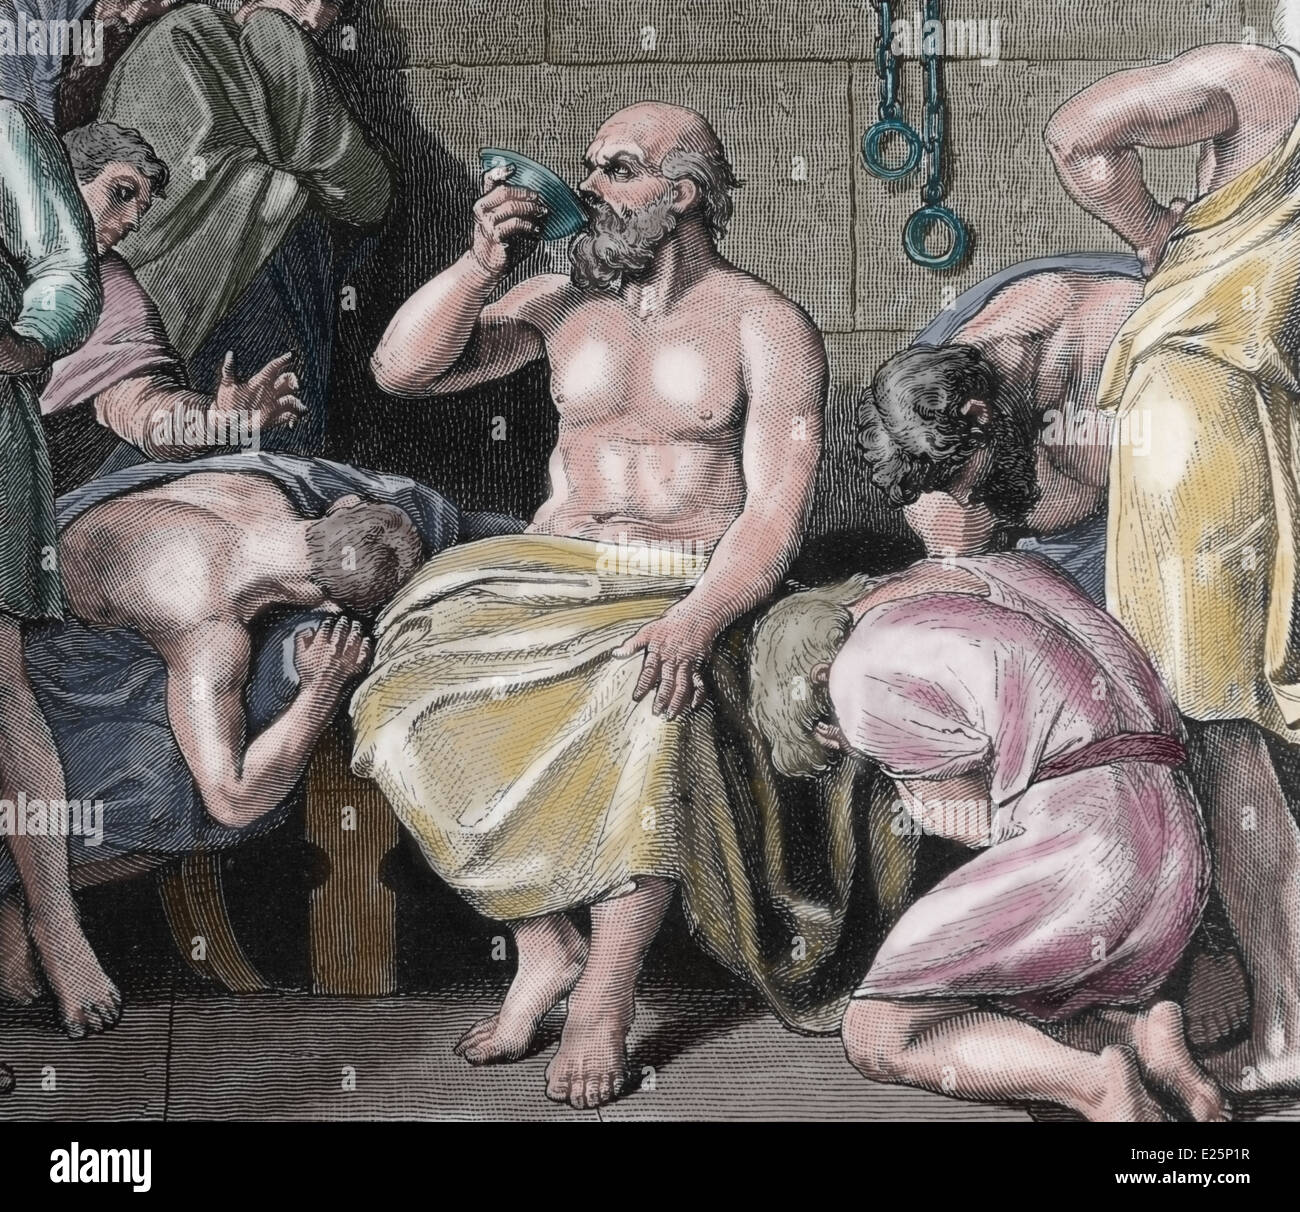 Death of Socrates (469 BC-399 BC) by drinking poison. Classical Greek philosopher. Engraving, Color. Stock Photo